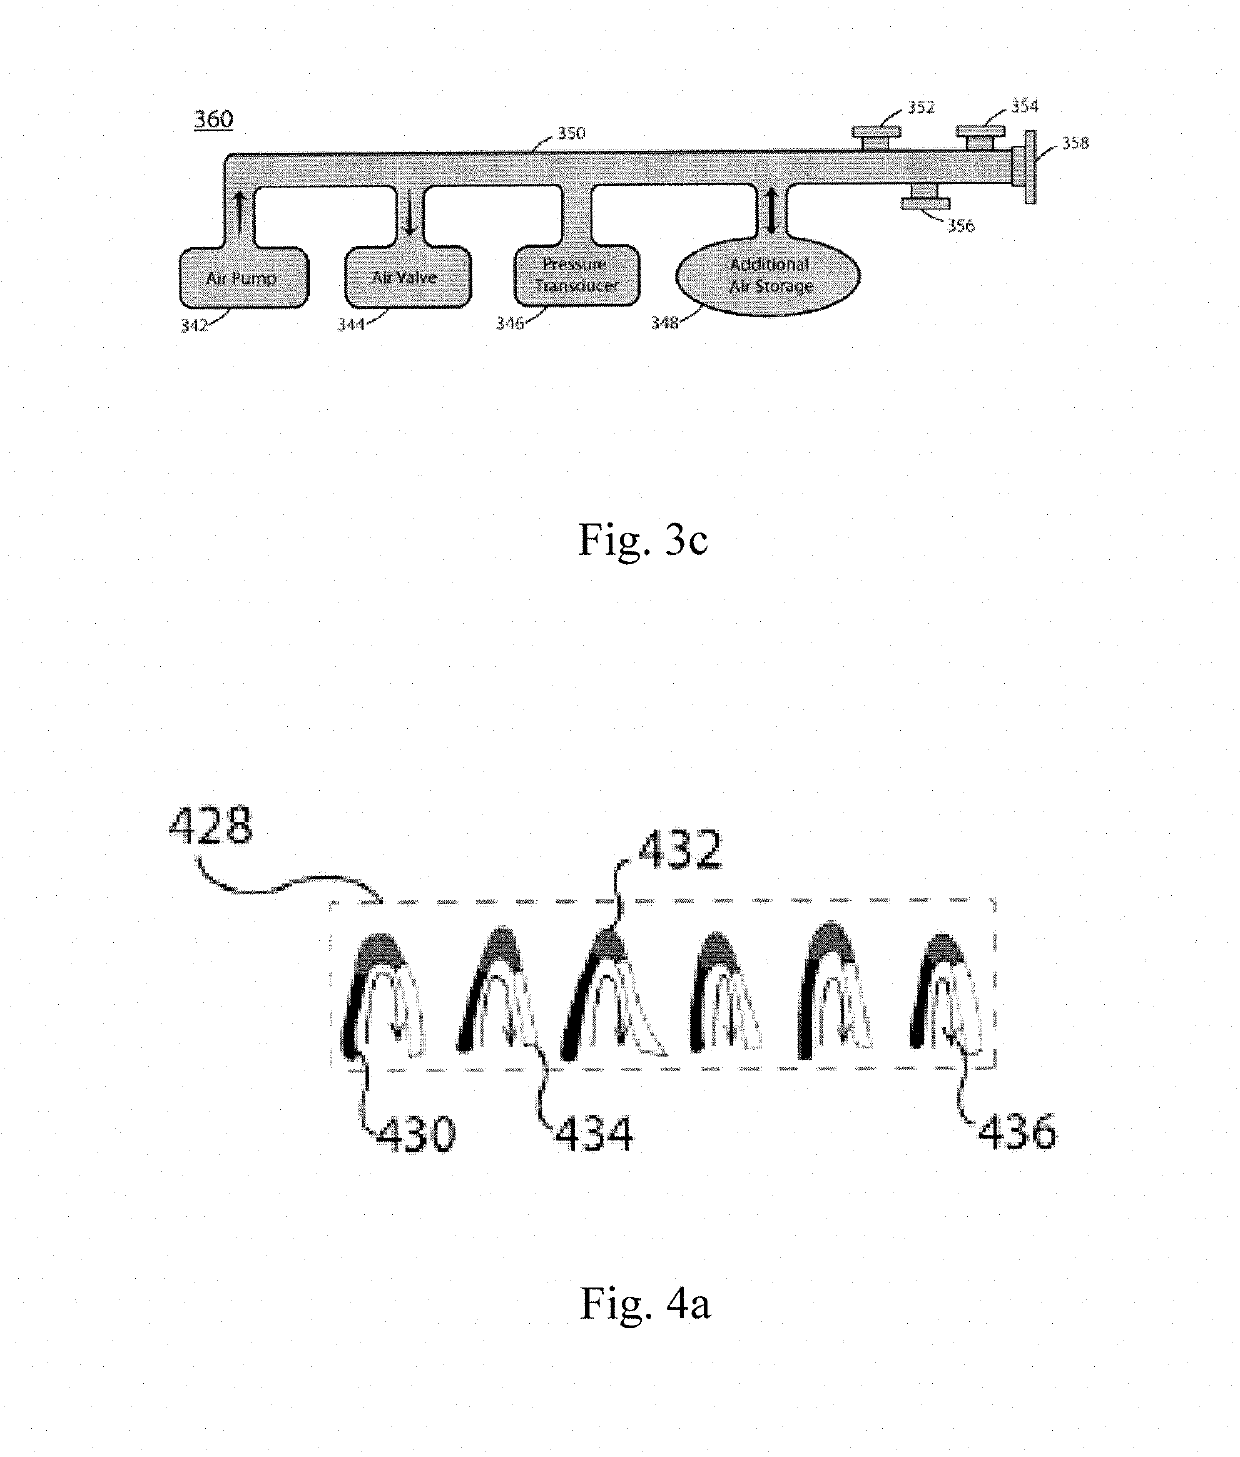 Devices and methods for non-invasive capillary blood pressure measurement